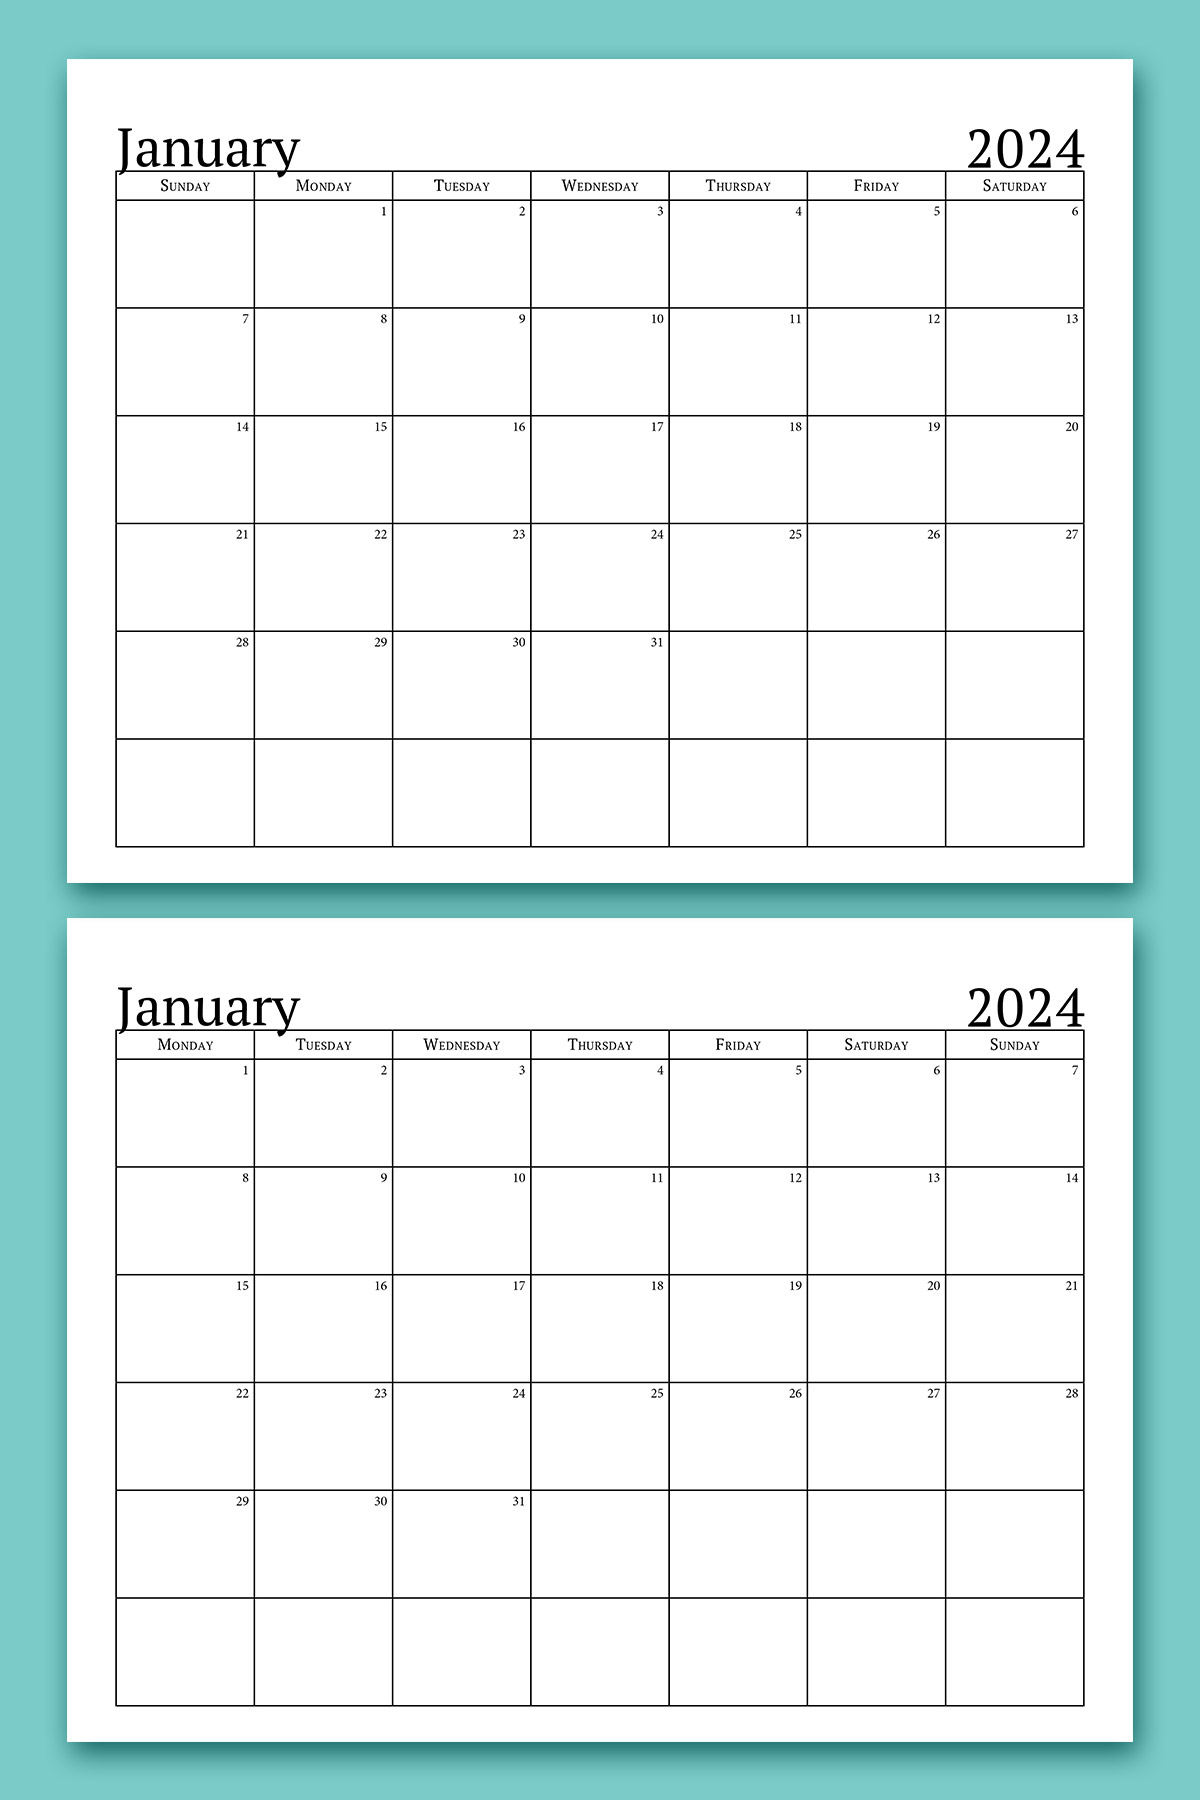 This image shows an example of the free 2024 printable calendar one page design you can get for free in this blog post. It's showing the month of January in both a Sunday and Monday start.